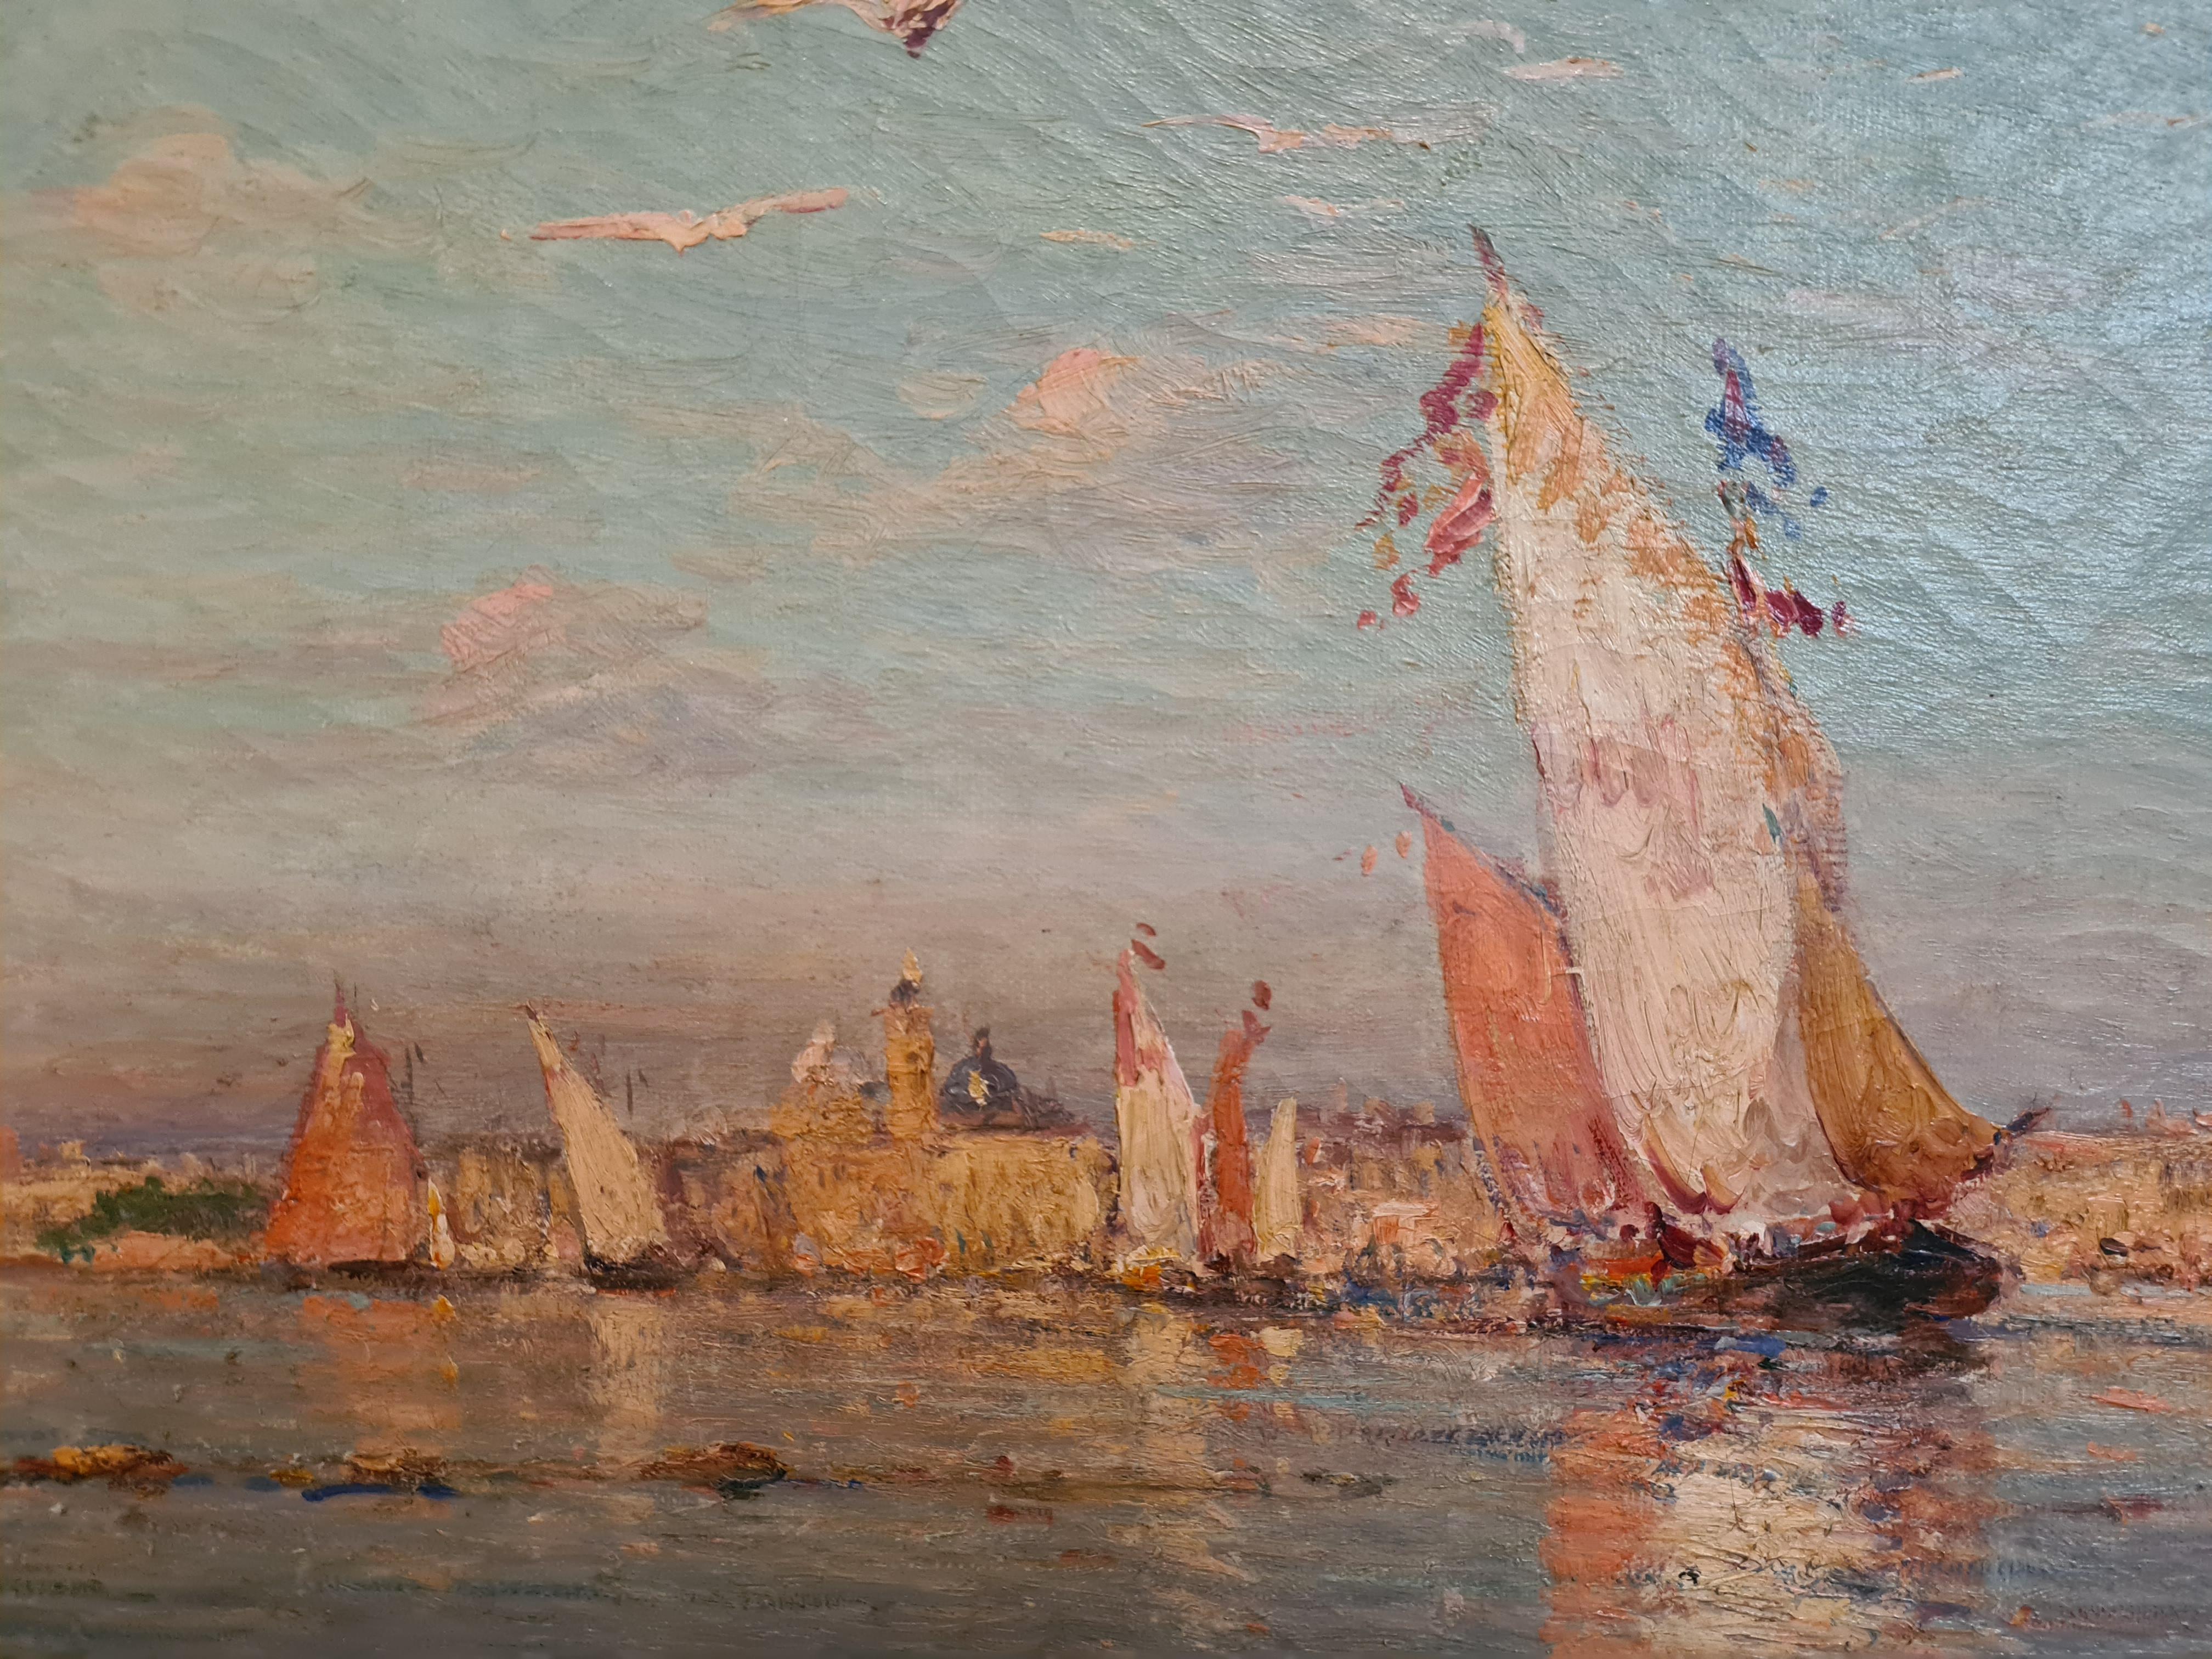 Boats on the the Venice Lagoon, Looking Towards the Doge's Palace and St Mark's. - Post-Impressionist Painting by Leopold Ziller